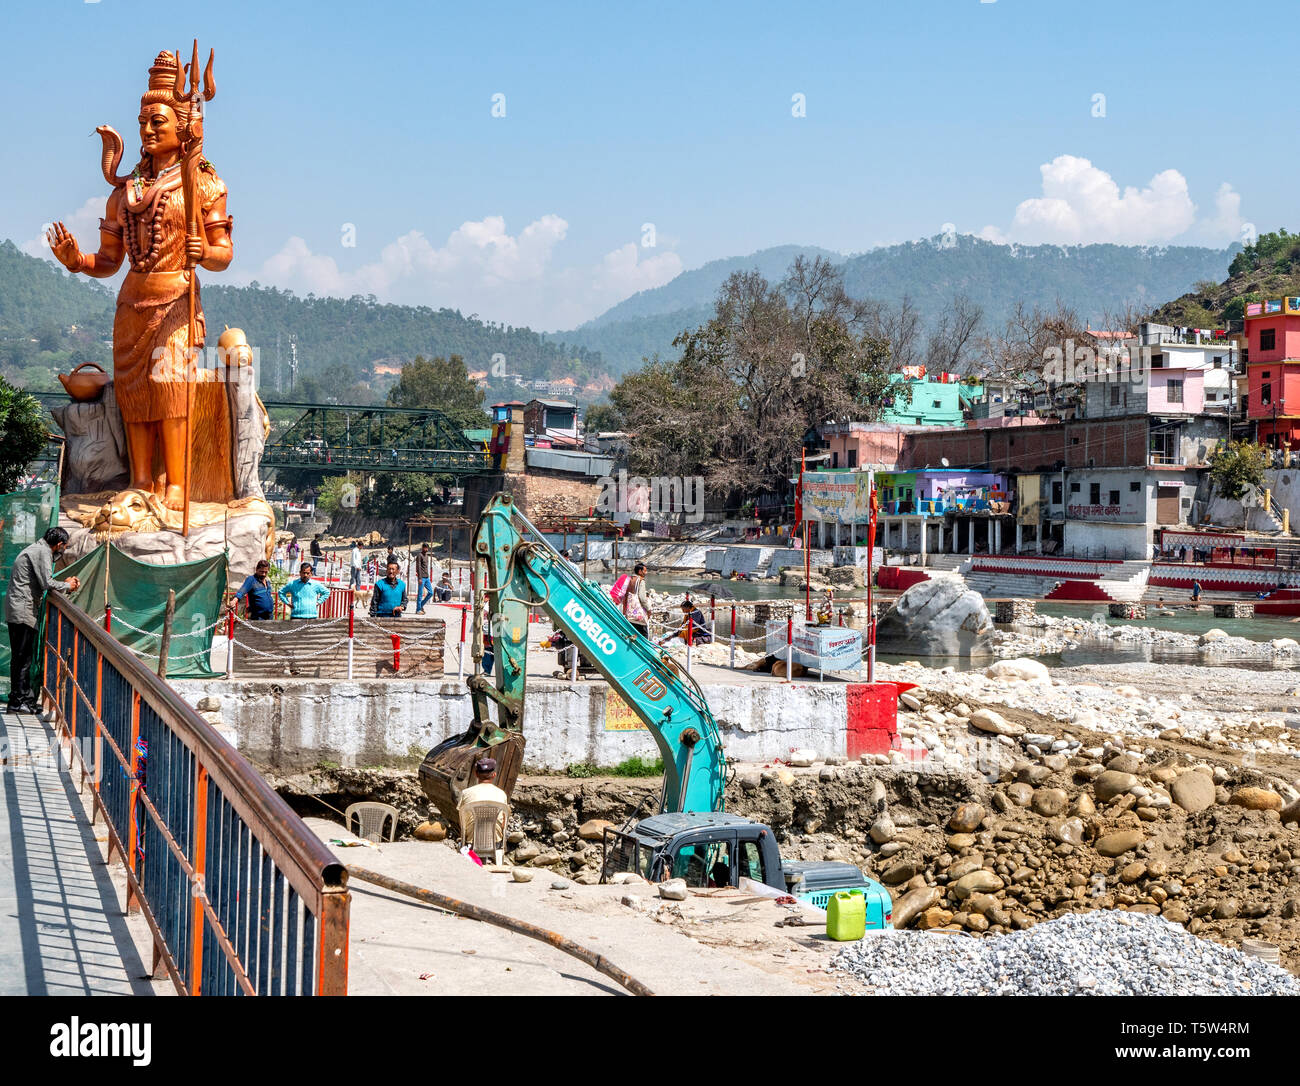 Building work going on around the enormous statue of Lord Shiva or Mahadeva the Hindu god at Bagnath Temple Bageshwar in Northern India Stock Photo